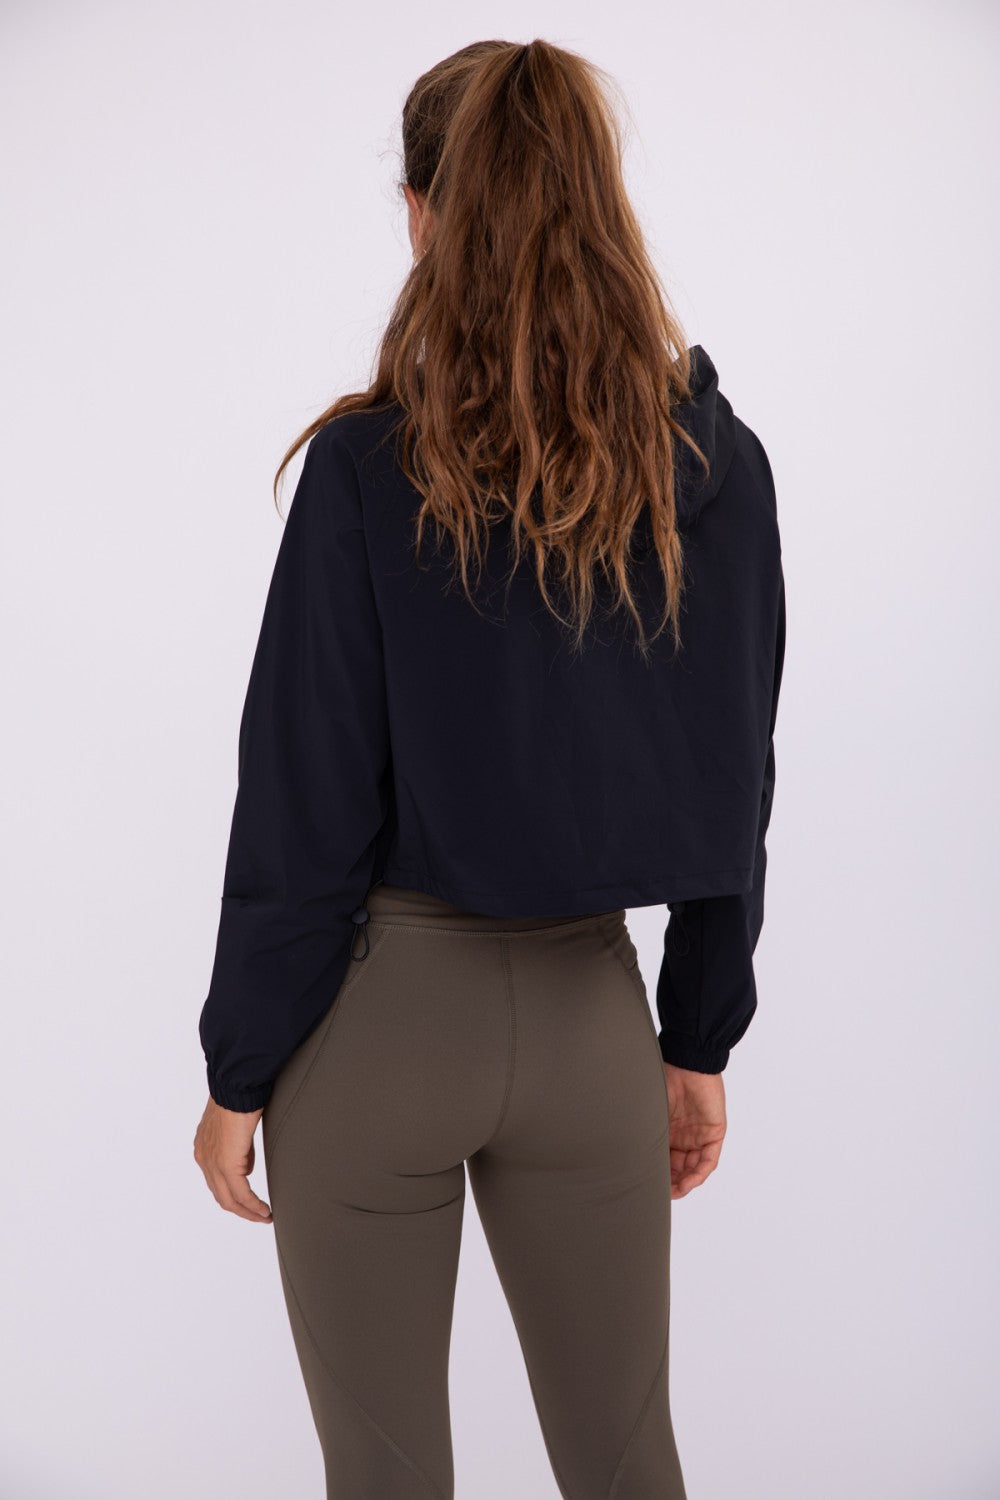 Waterproof Snap Front Cropped Pullover